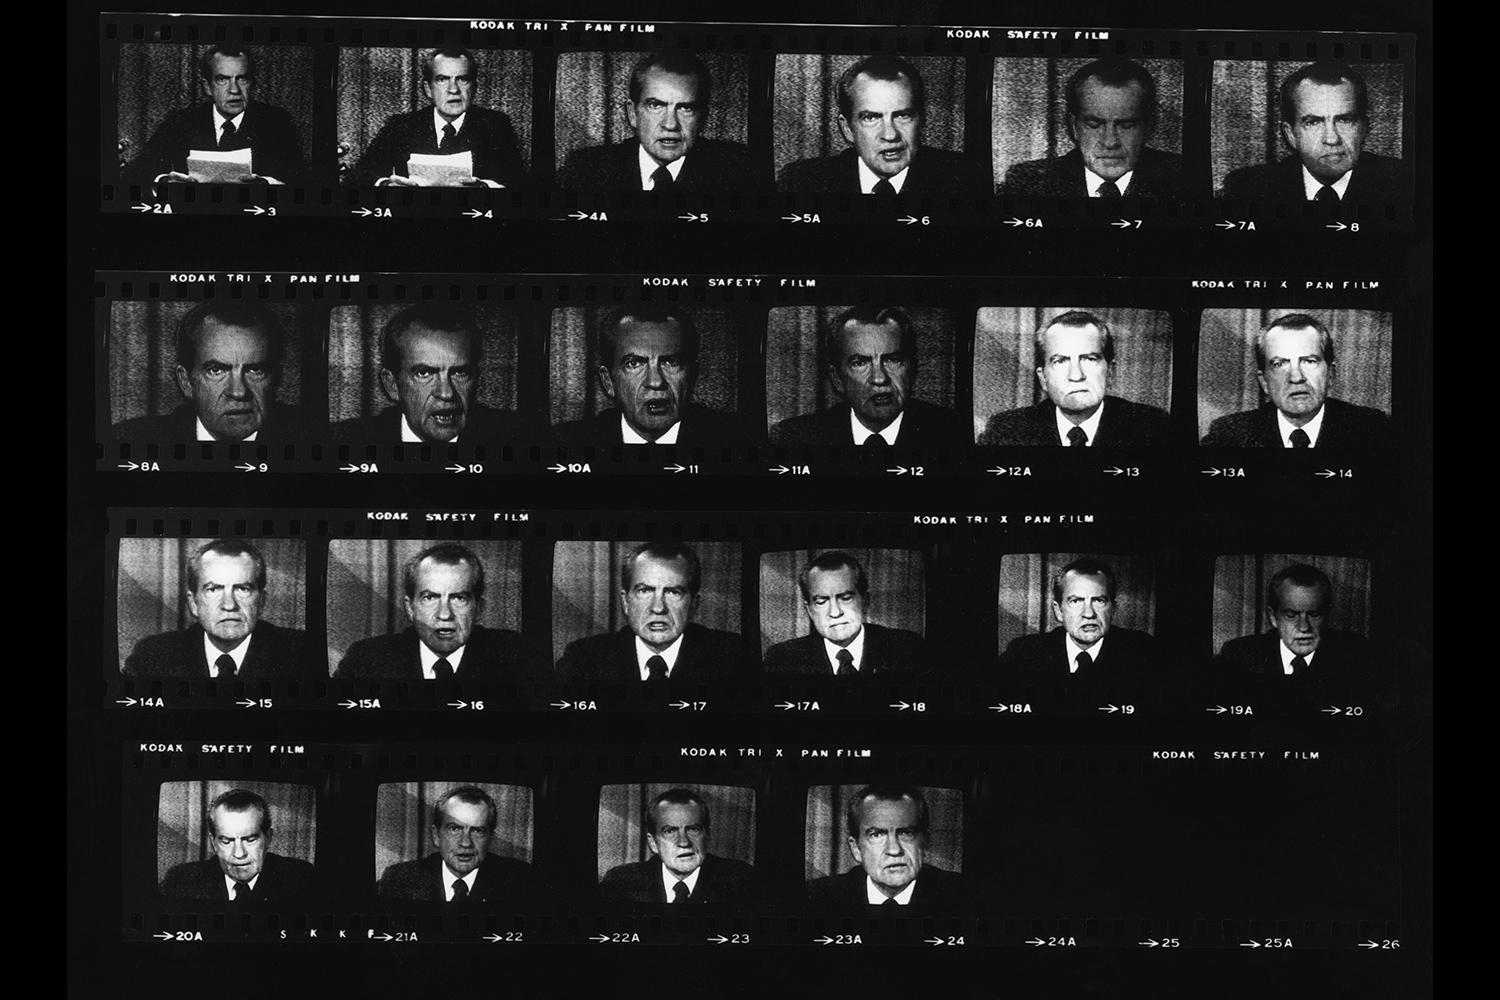 A contact sheet showing the resignation of Richard Nixon as televised from the White House on August 8th, 1974.